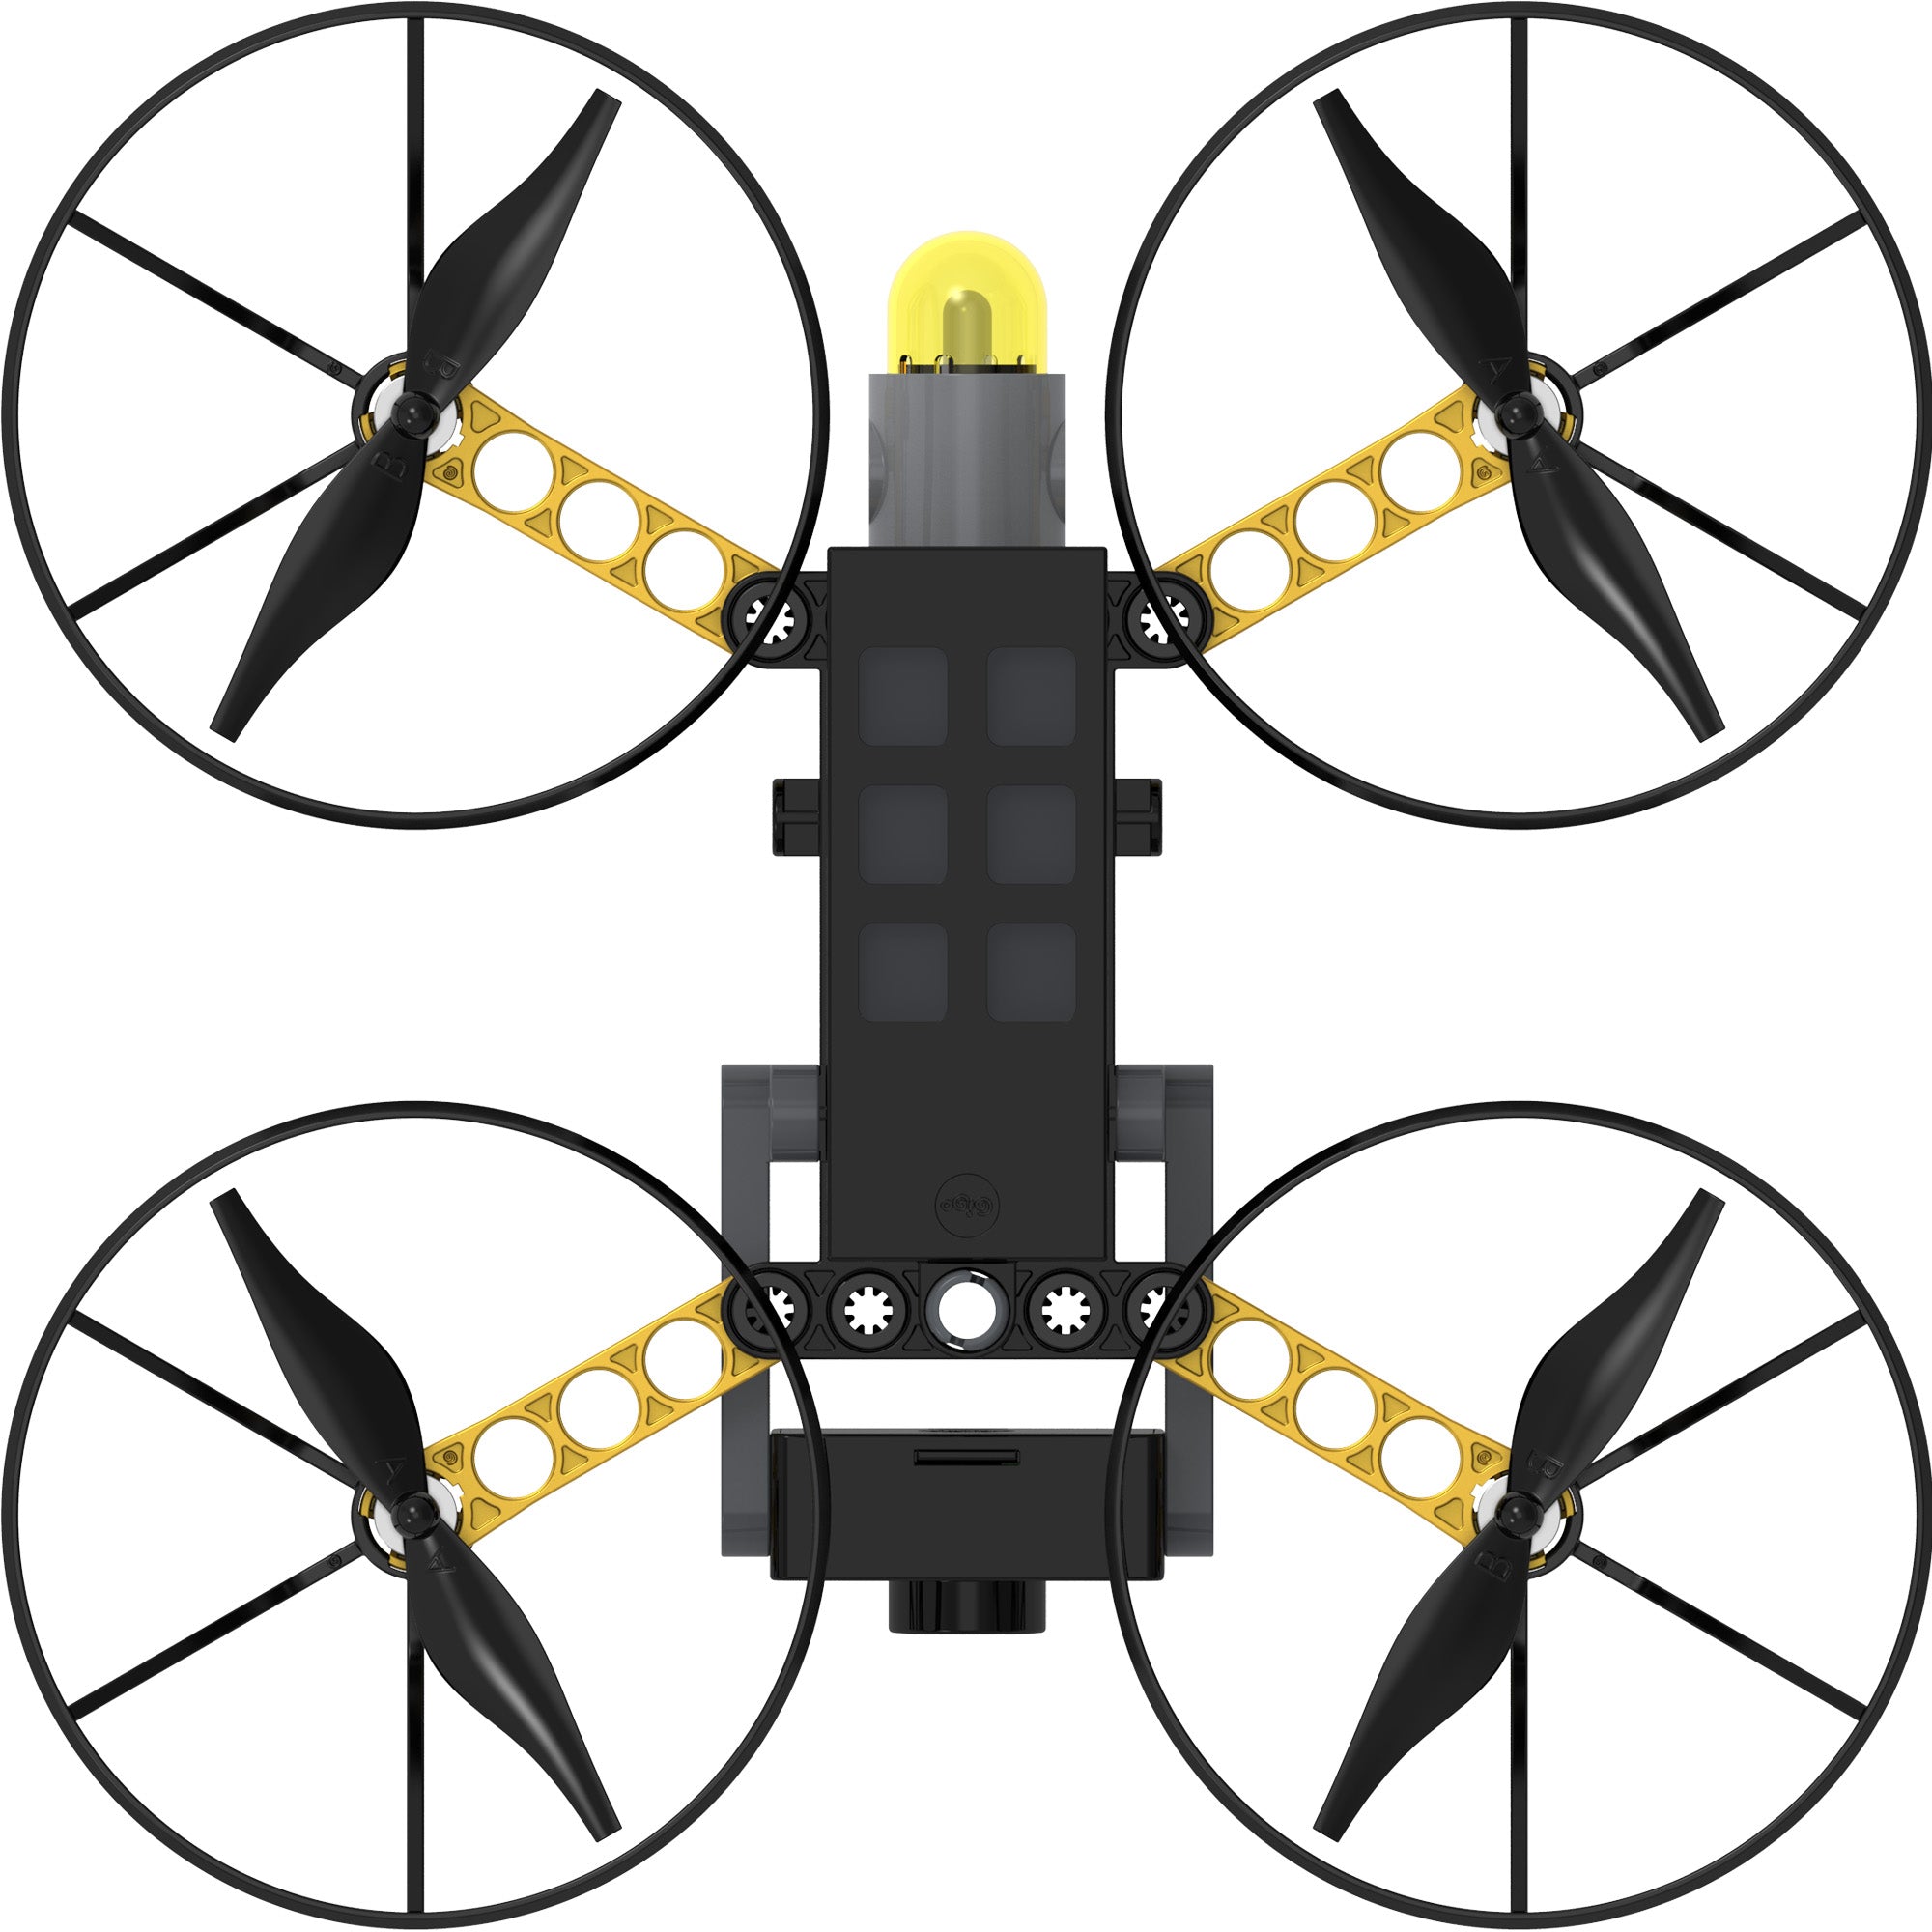 5 In 1 Buildable Drone With HD Camera    